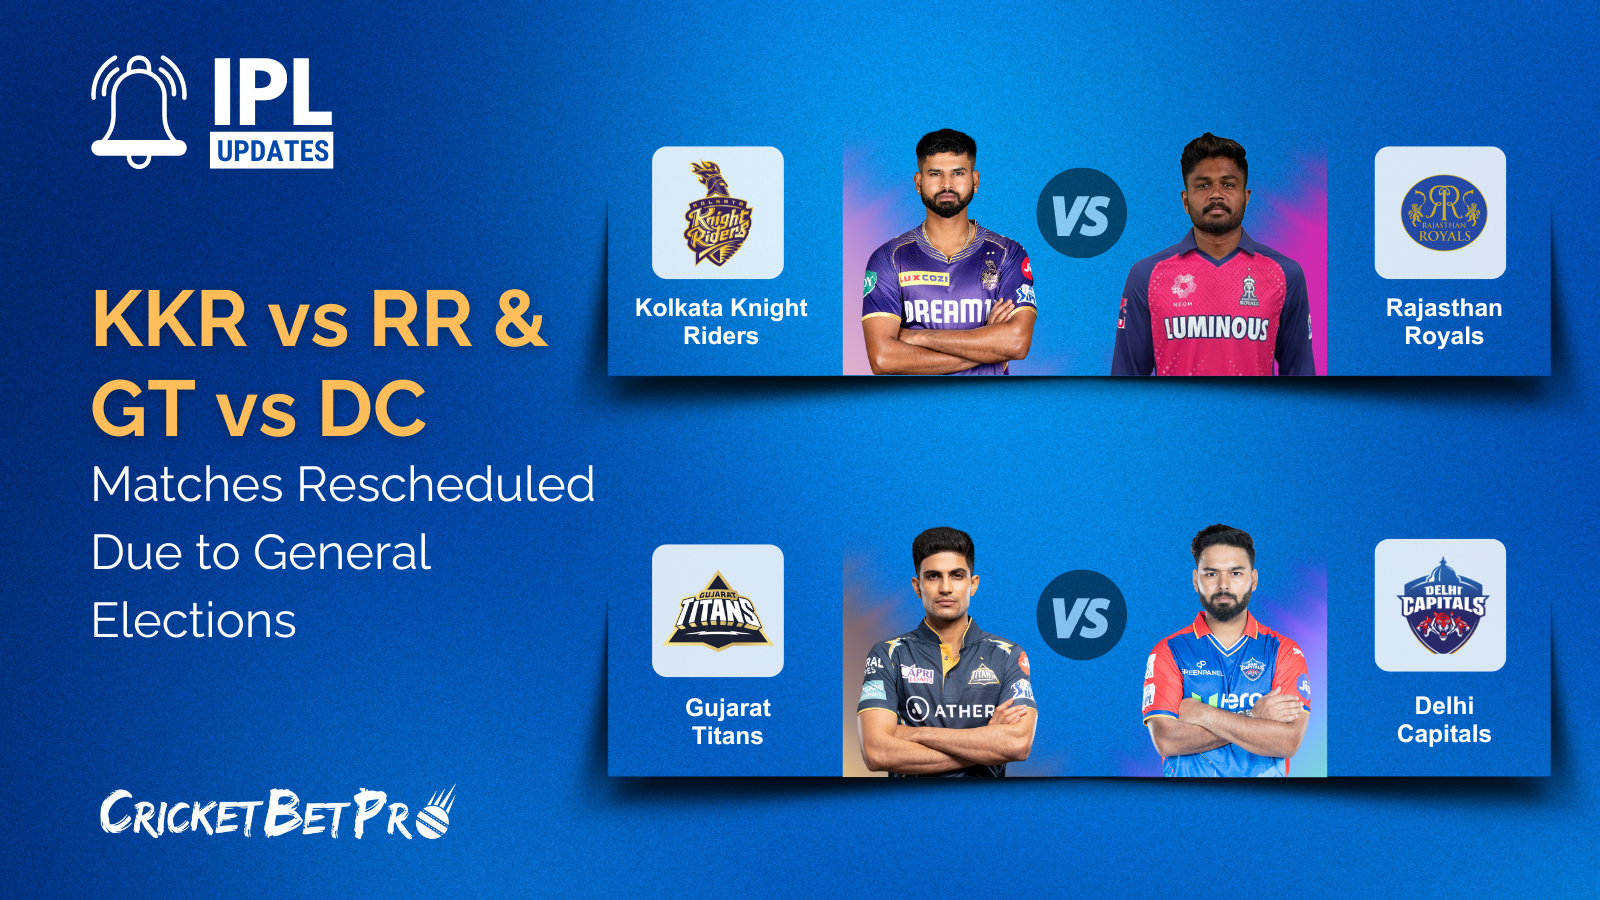 KKR-vs-RR-GT-vs-DC-Matches-Rescheduled-Due-to-General-Elections.png